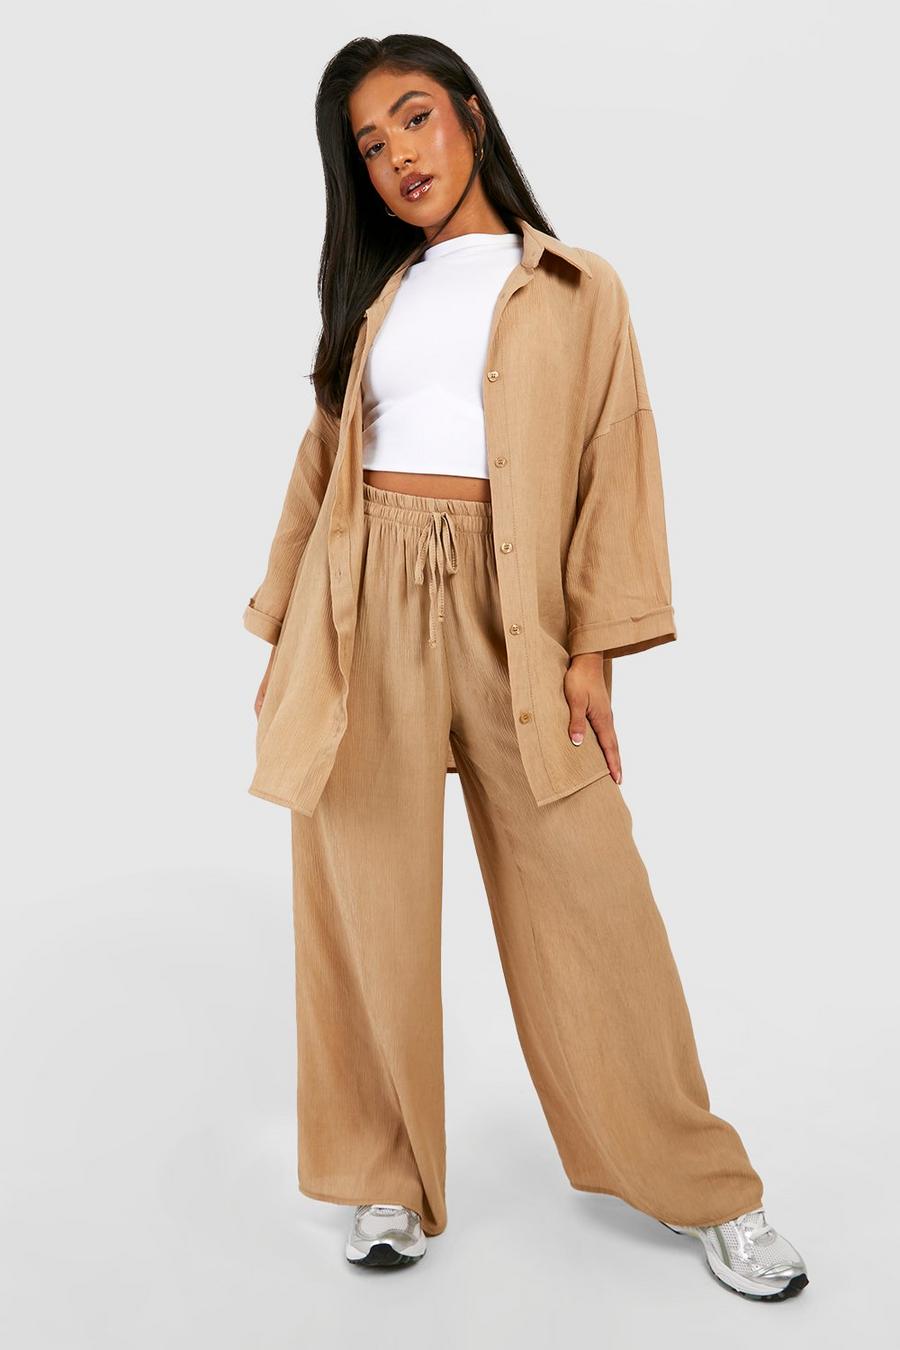 Stone beis Petite Textured Crinkle Oversized Shirt & Trousers